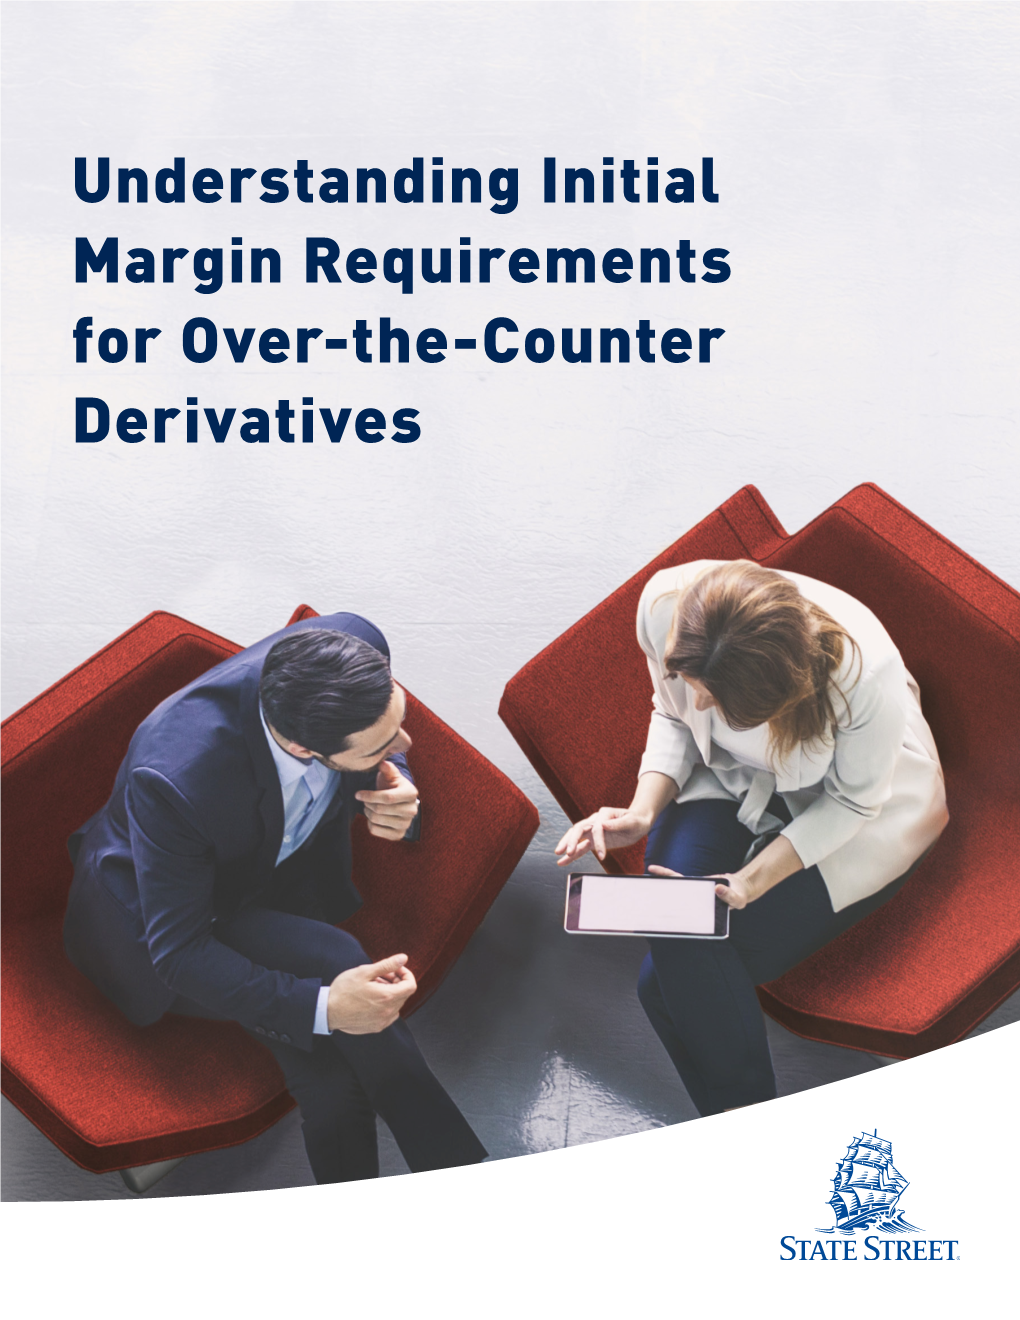 Understanding Initial Margin Requirements for Over-The-Counter Derivatives